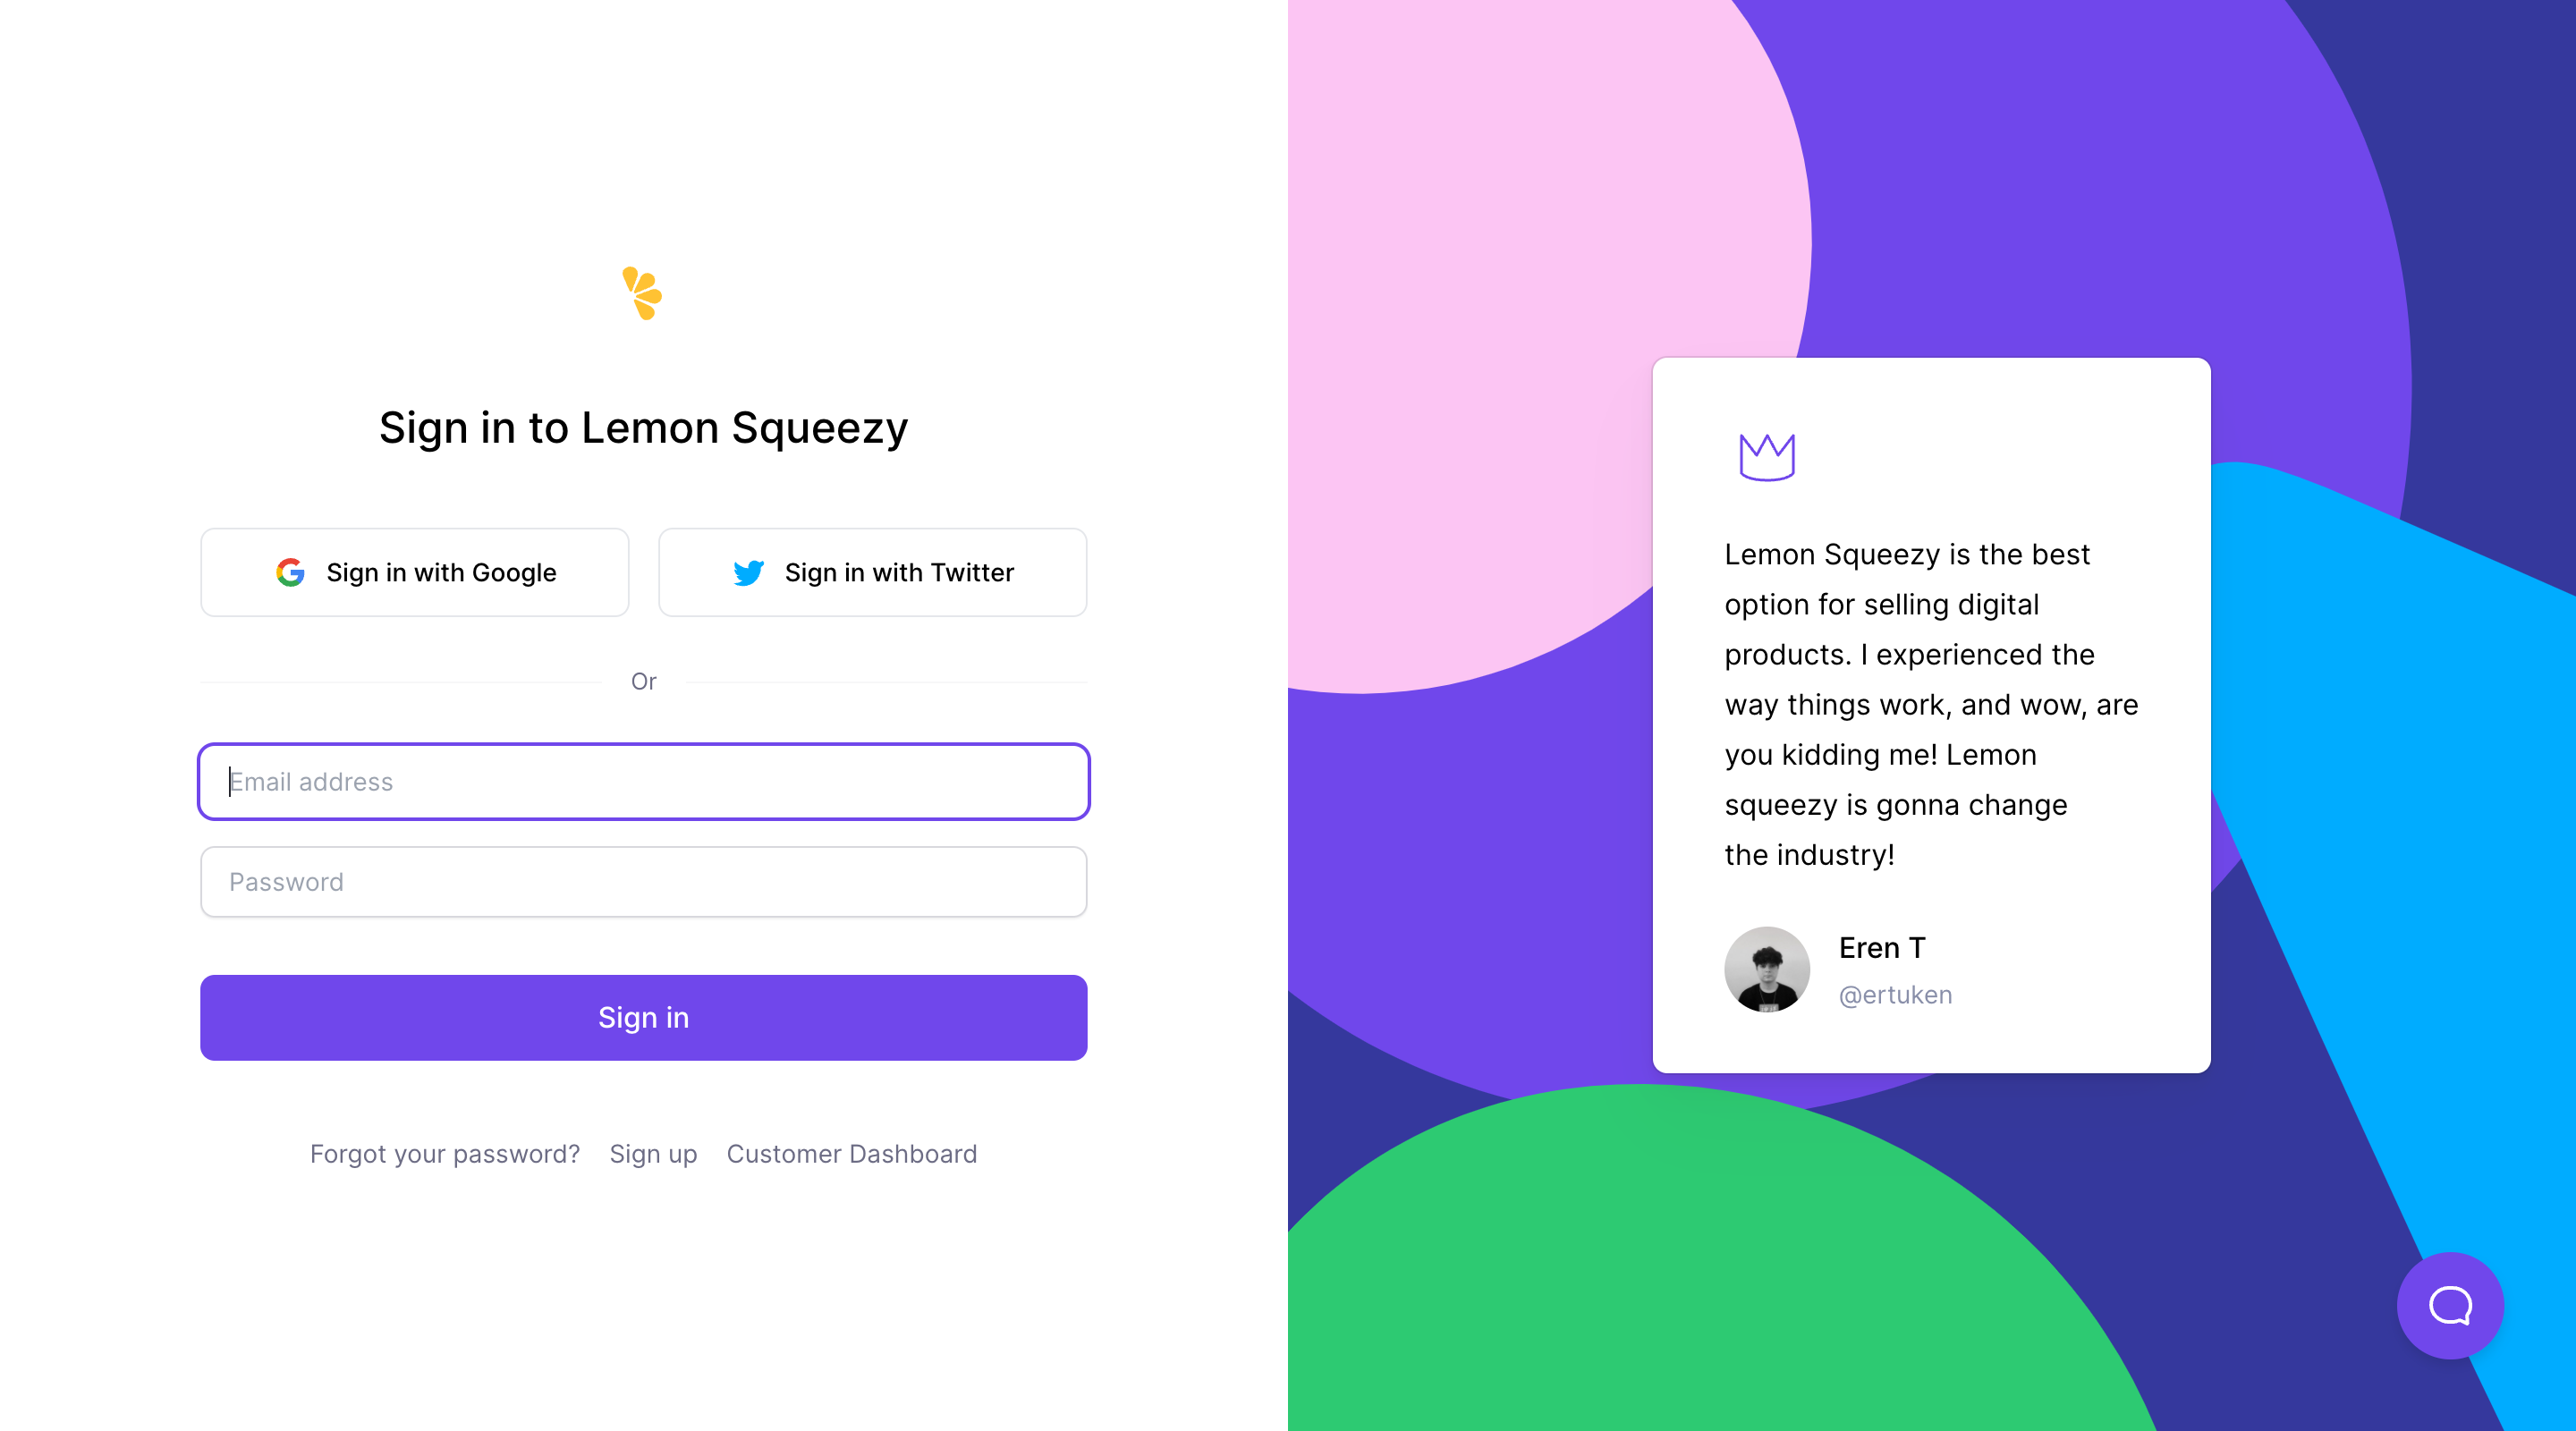 Screenshot of the login screen for the Lemon Squeezy app. The screen is split in two, 50/50. To the left is a login form and buttons to sign in with Google and Twitter. To the right is a colorful background with the familiar Lemon Squeezy color patterns of drops and circles. In the middle of the section is a testimonial from a Lemon Squeezy customer.